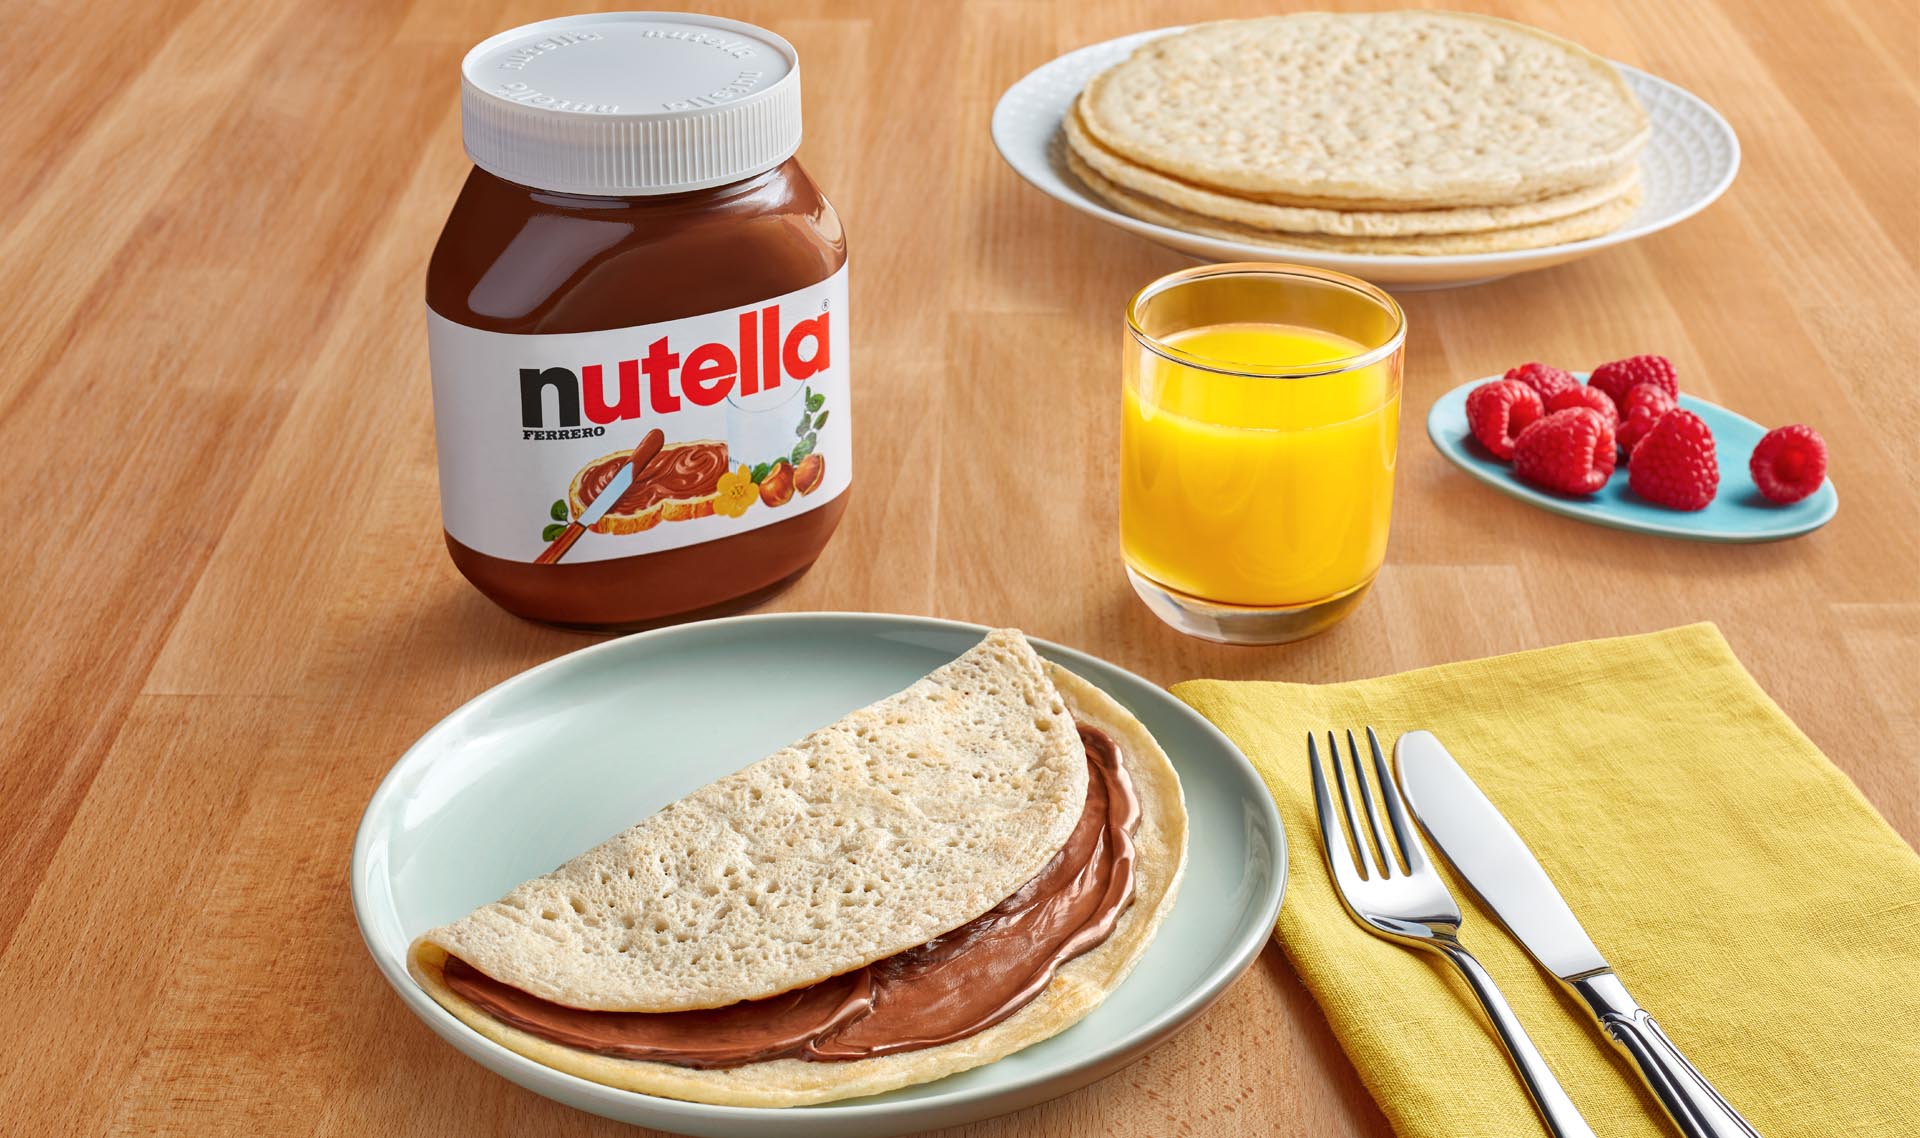 Marasee with Nutella®